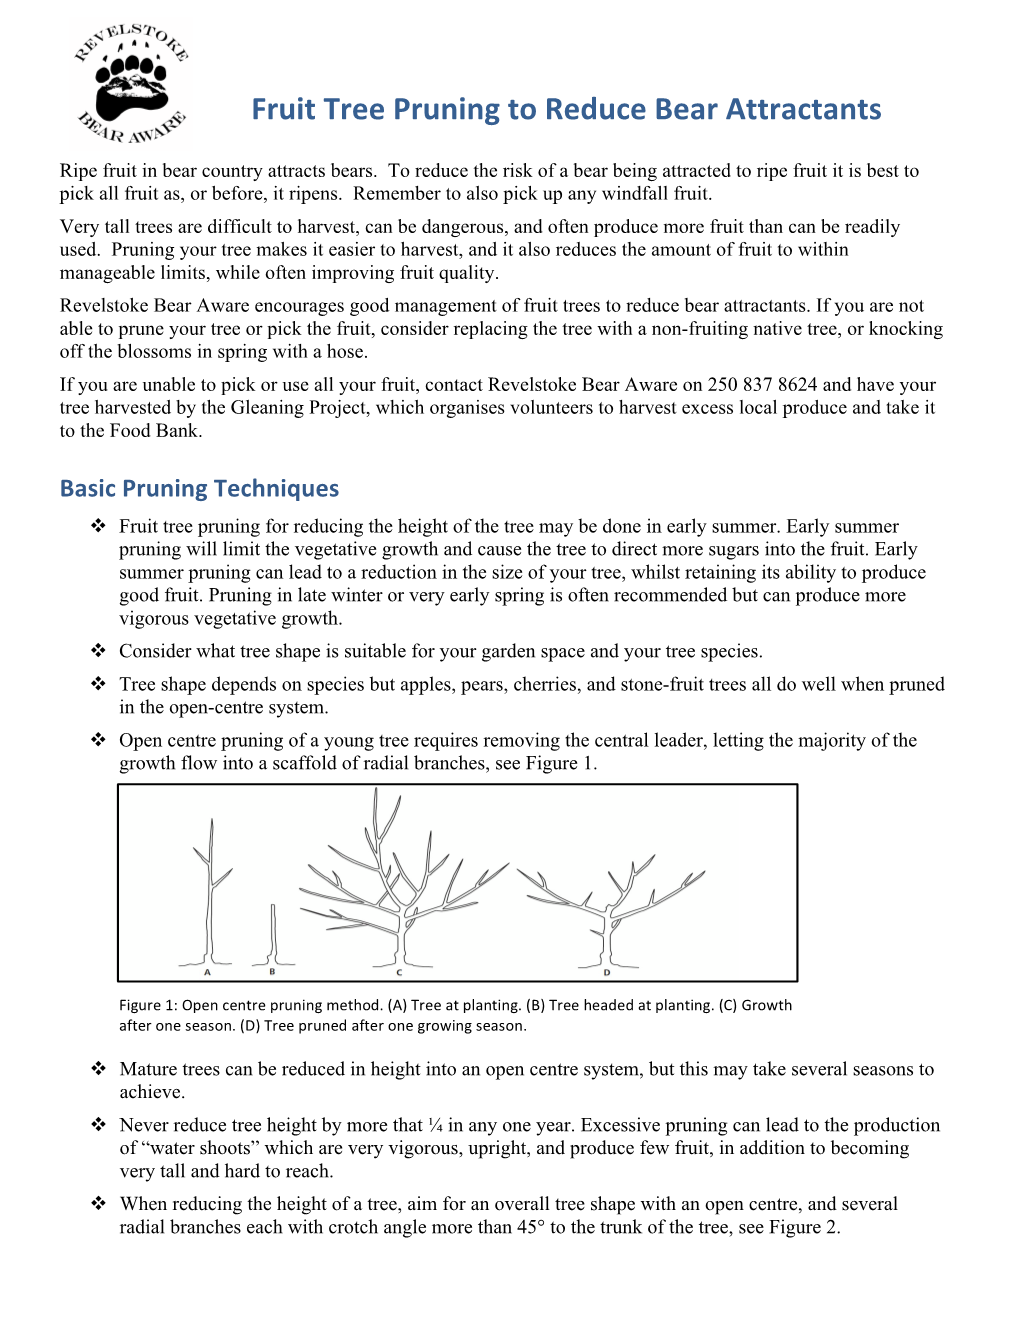 Fruit Tree Pruning and Bear Attractants